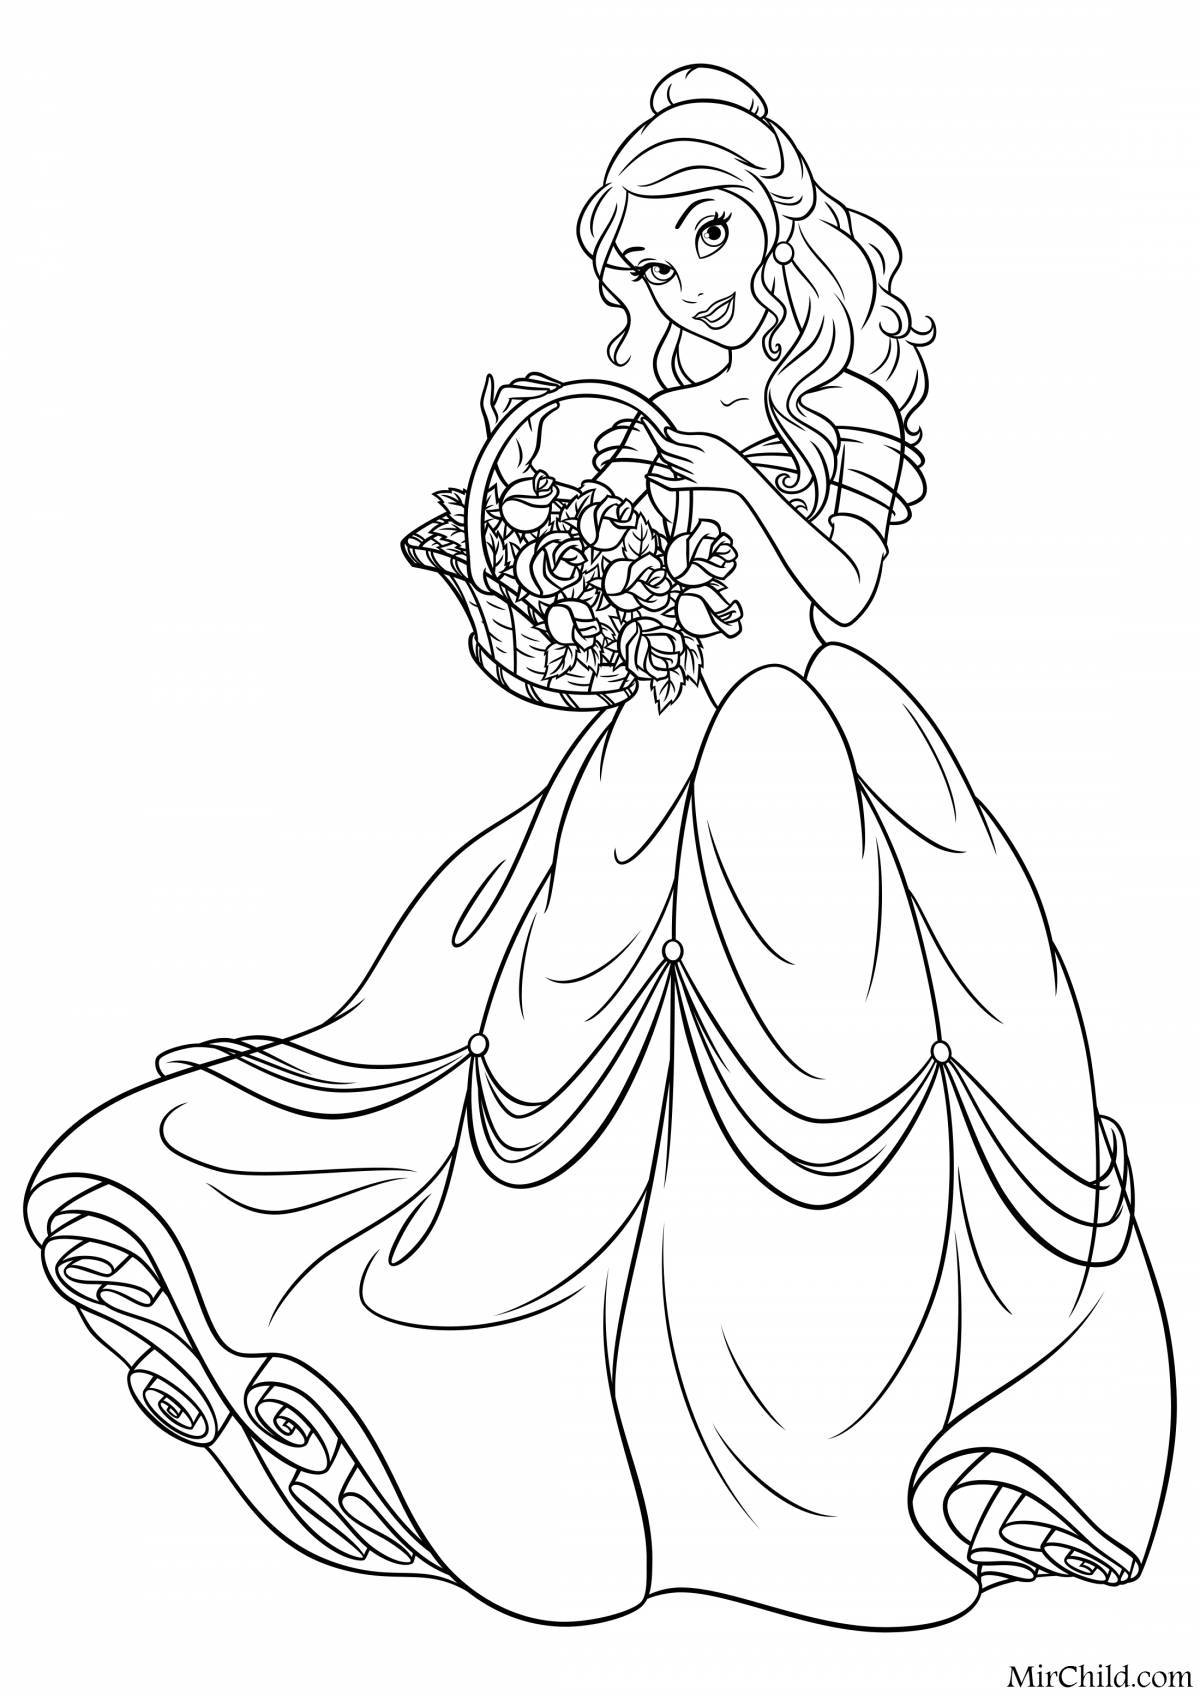 Flawless coloring of the princess in beautiful dresses